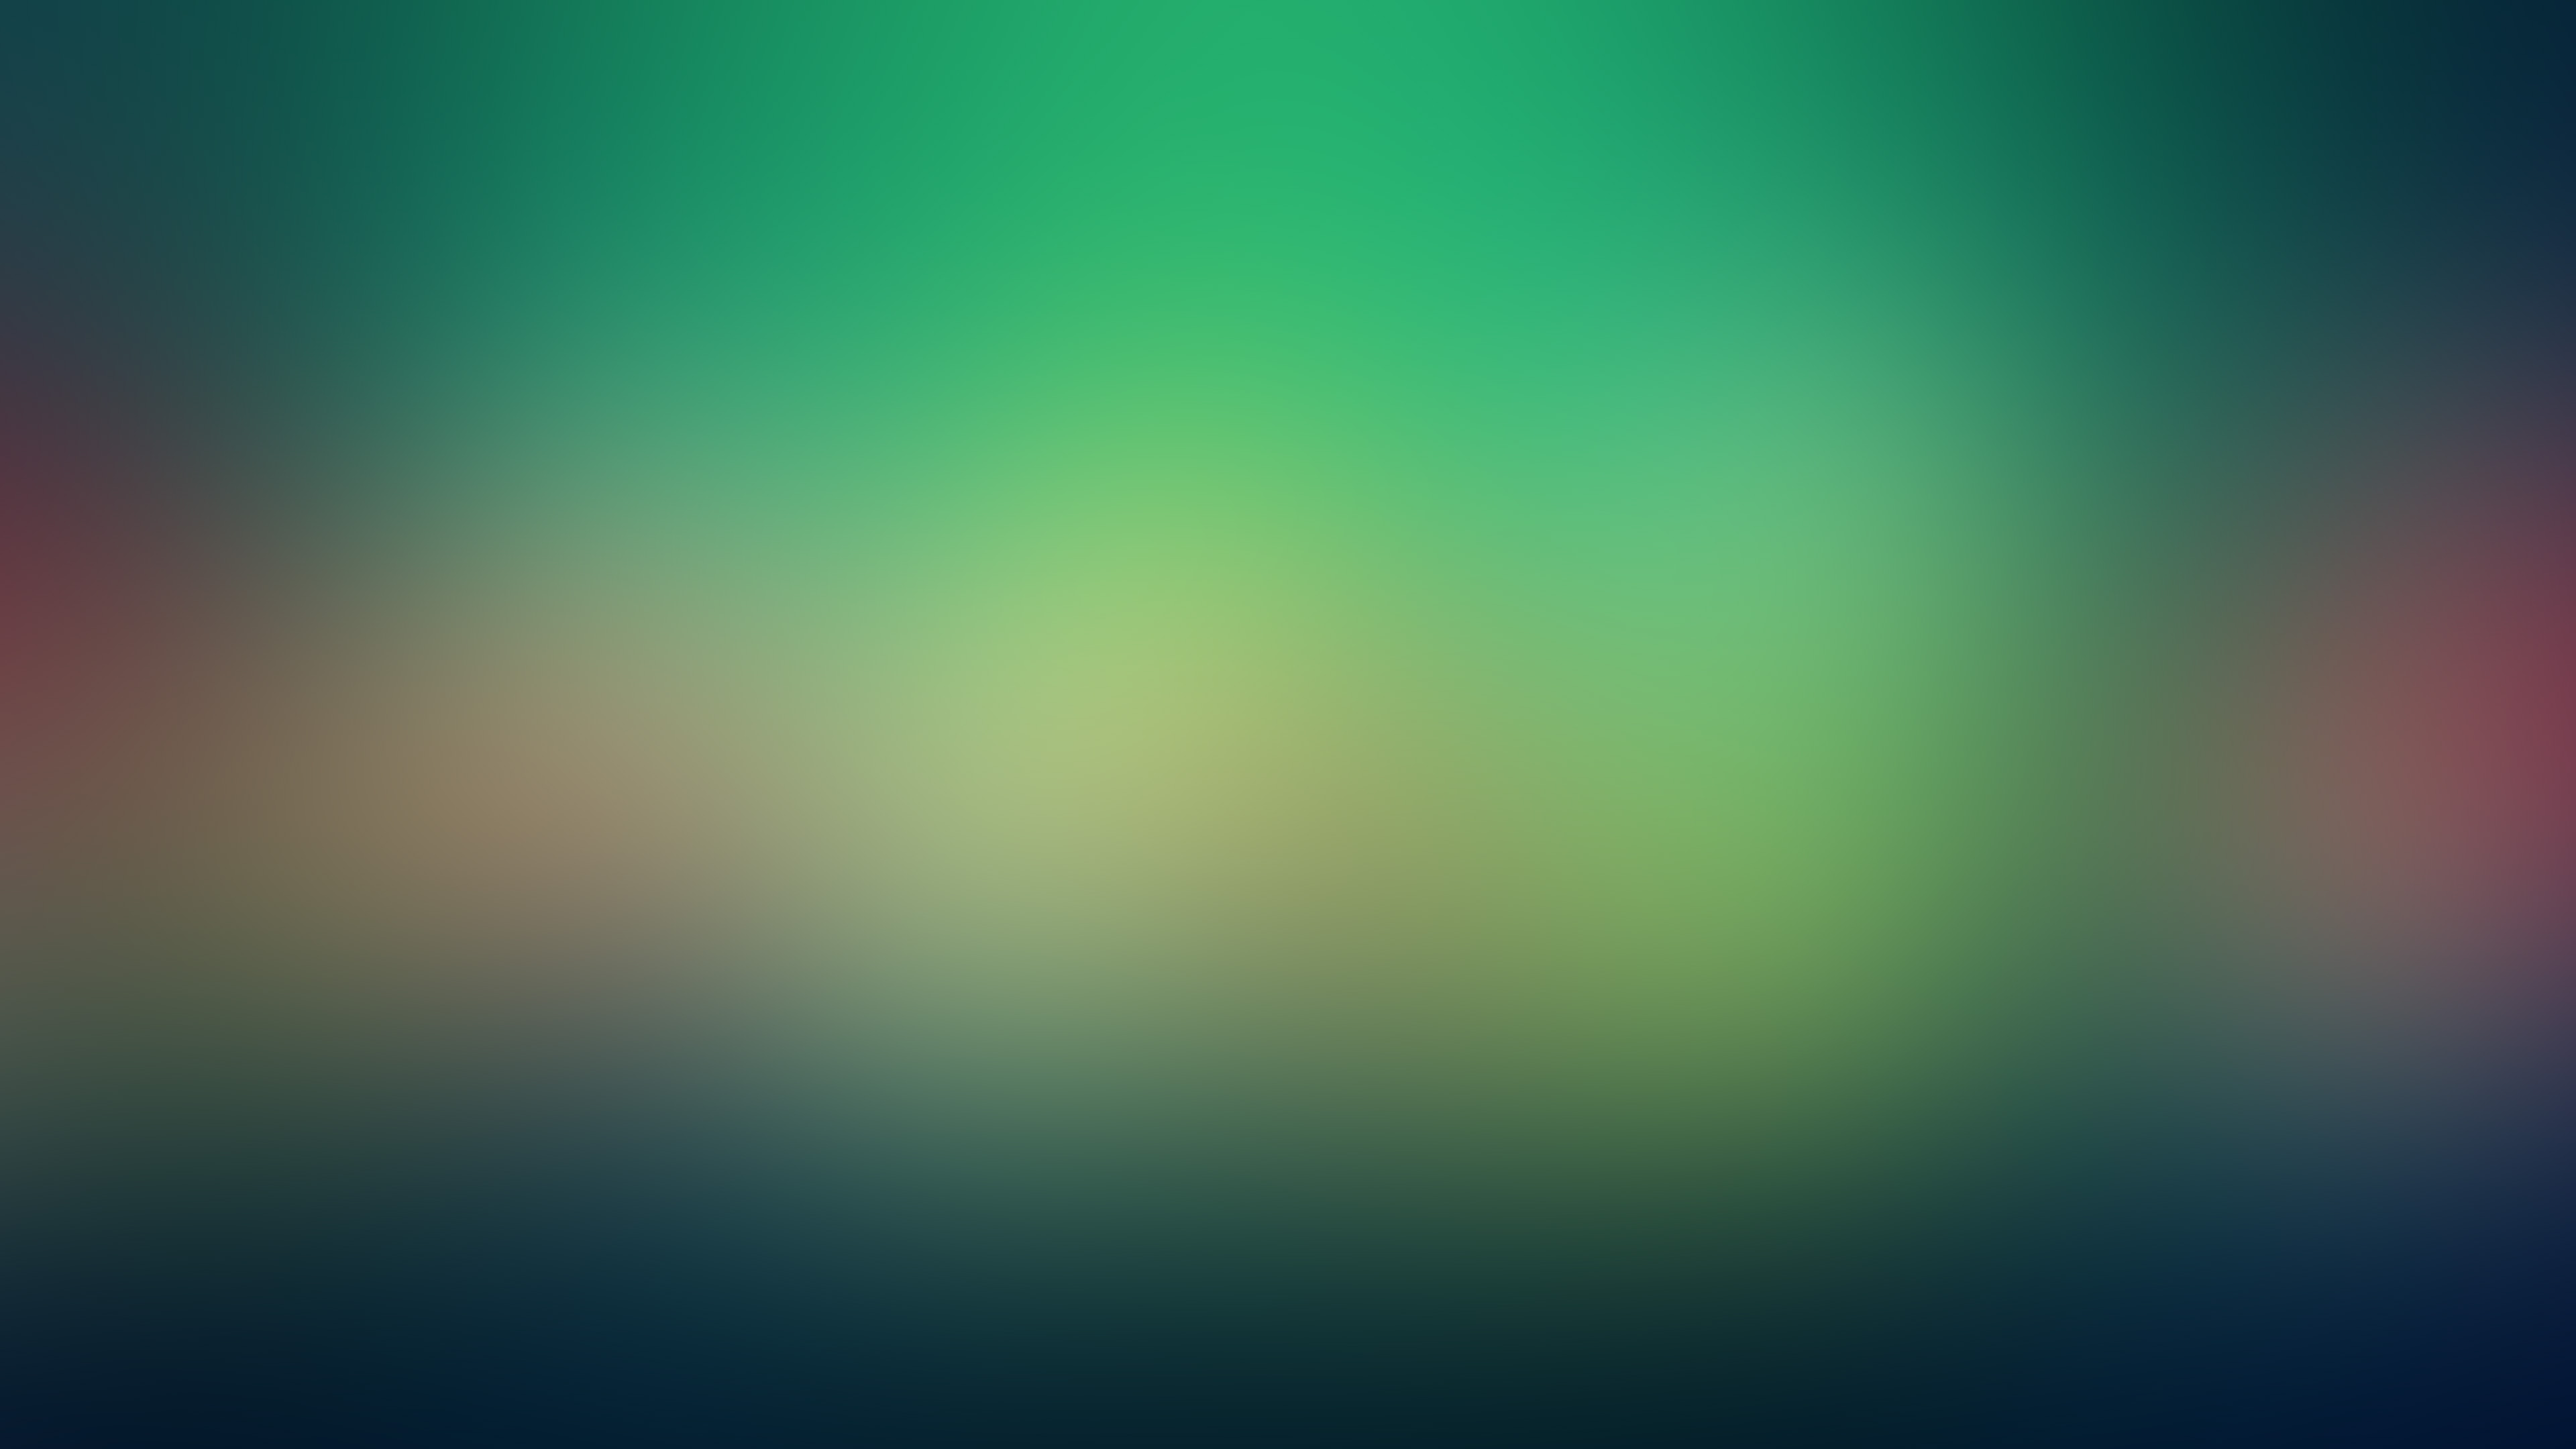 abstract colour expression 4k 1551645488 - Abstract Colour Expression 4k - hd-wallpapers, green wallpapers, deviantart wallpapers, blur wallpapers, abstract wallpapers, 4k-wallpapers